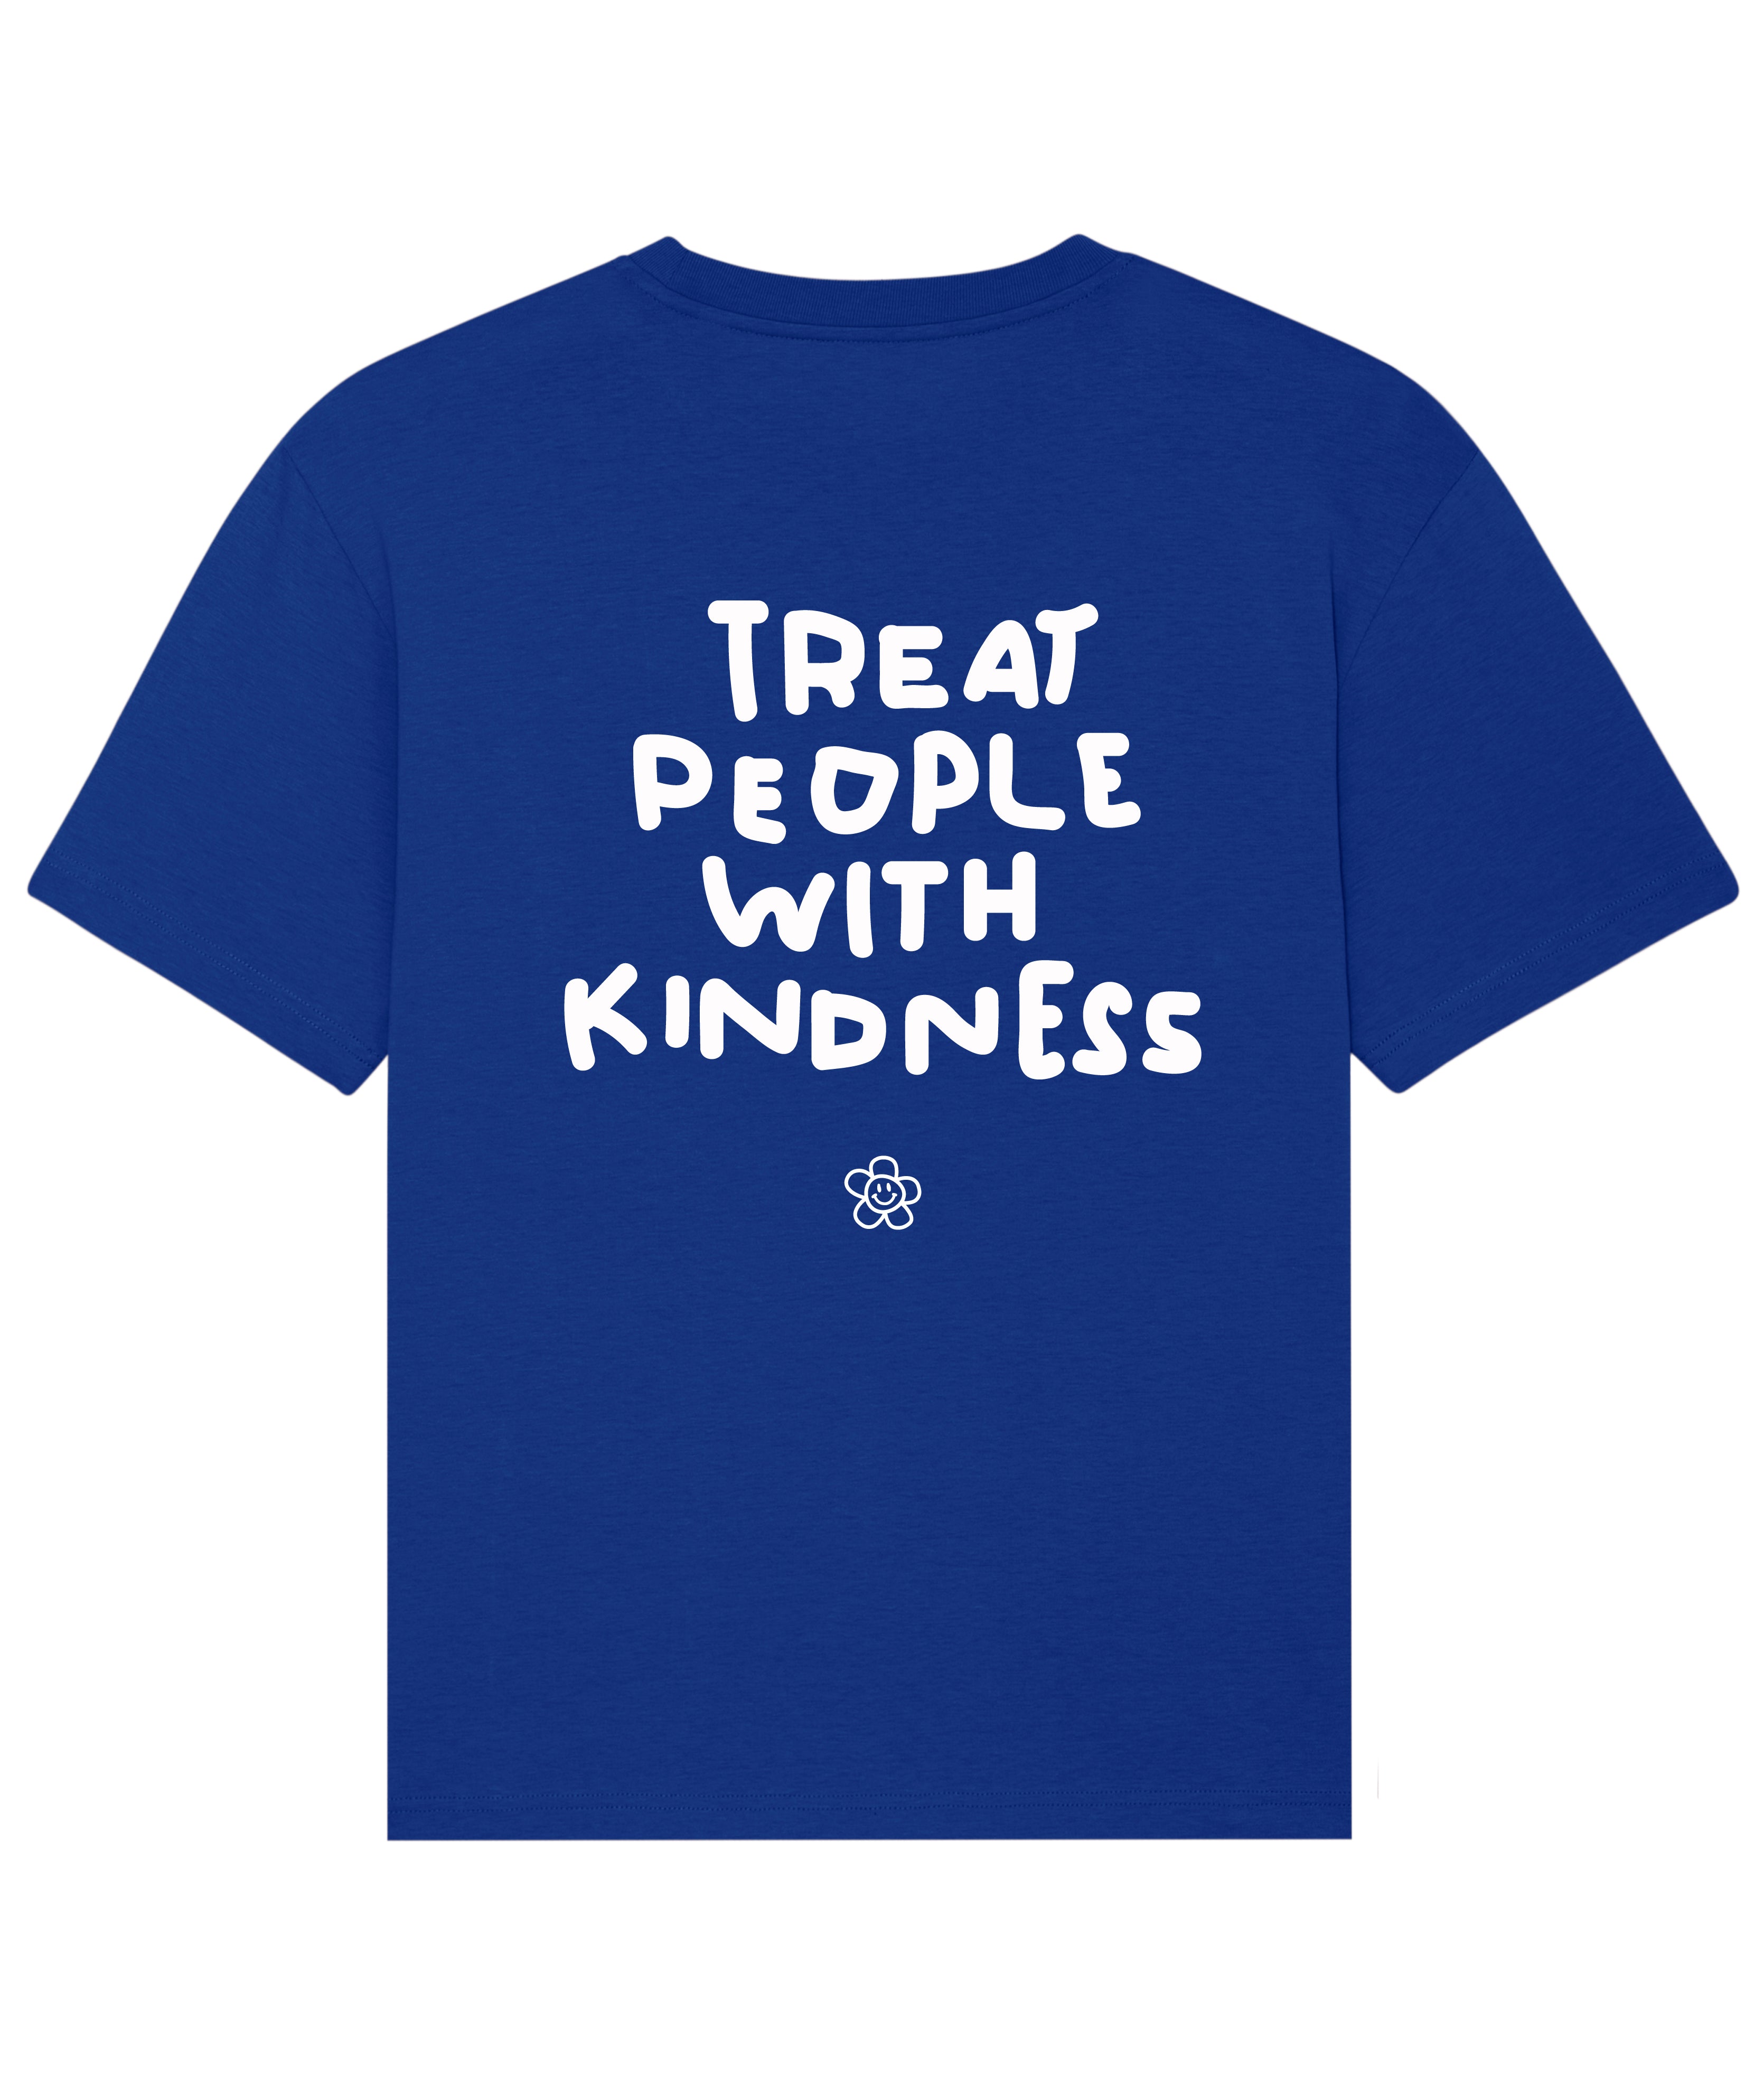 TREAT PEOPLE WITH KINDNESS ROYAL BLUE TEE